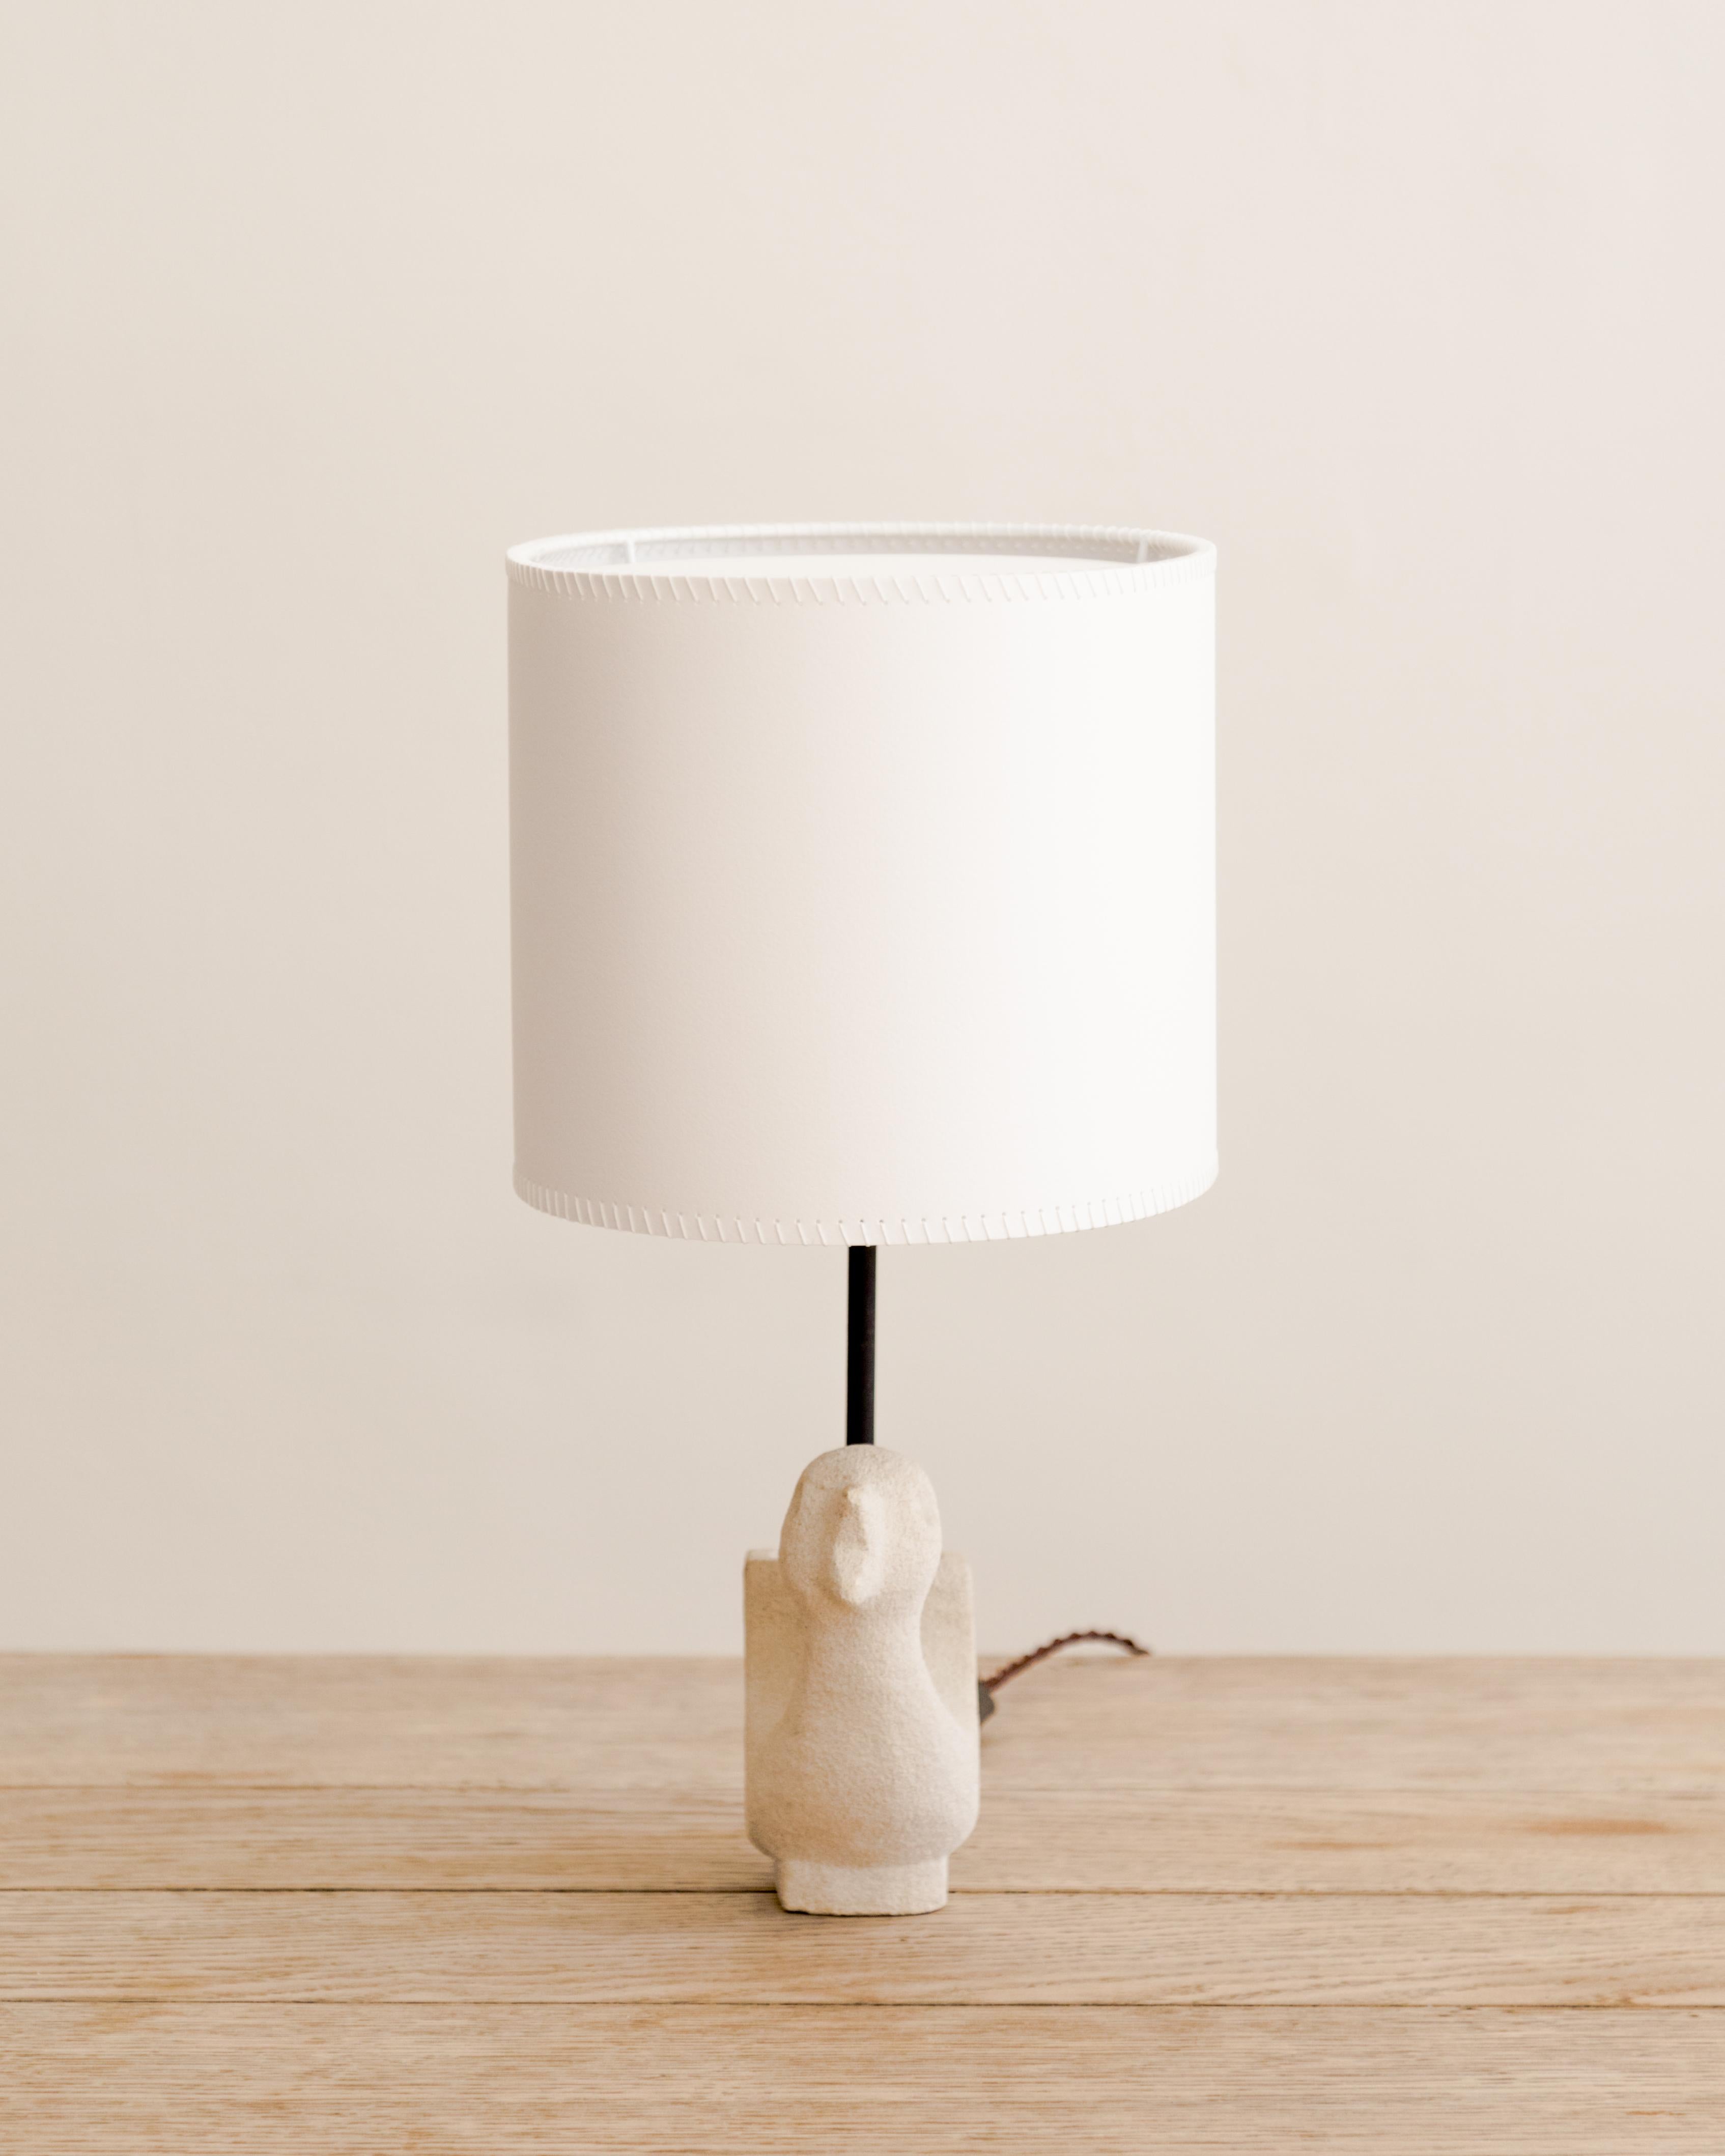 Whimsical cast stone bird chick table lamp, newly wired with artist paper shade with whip stitch detail, France circa 1970's.